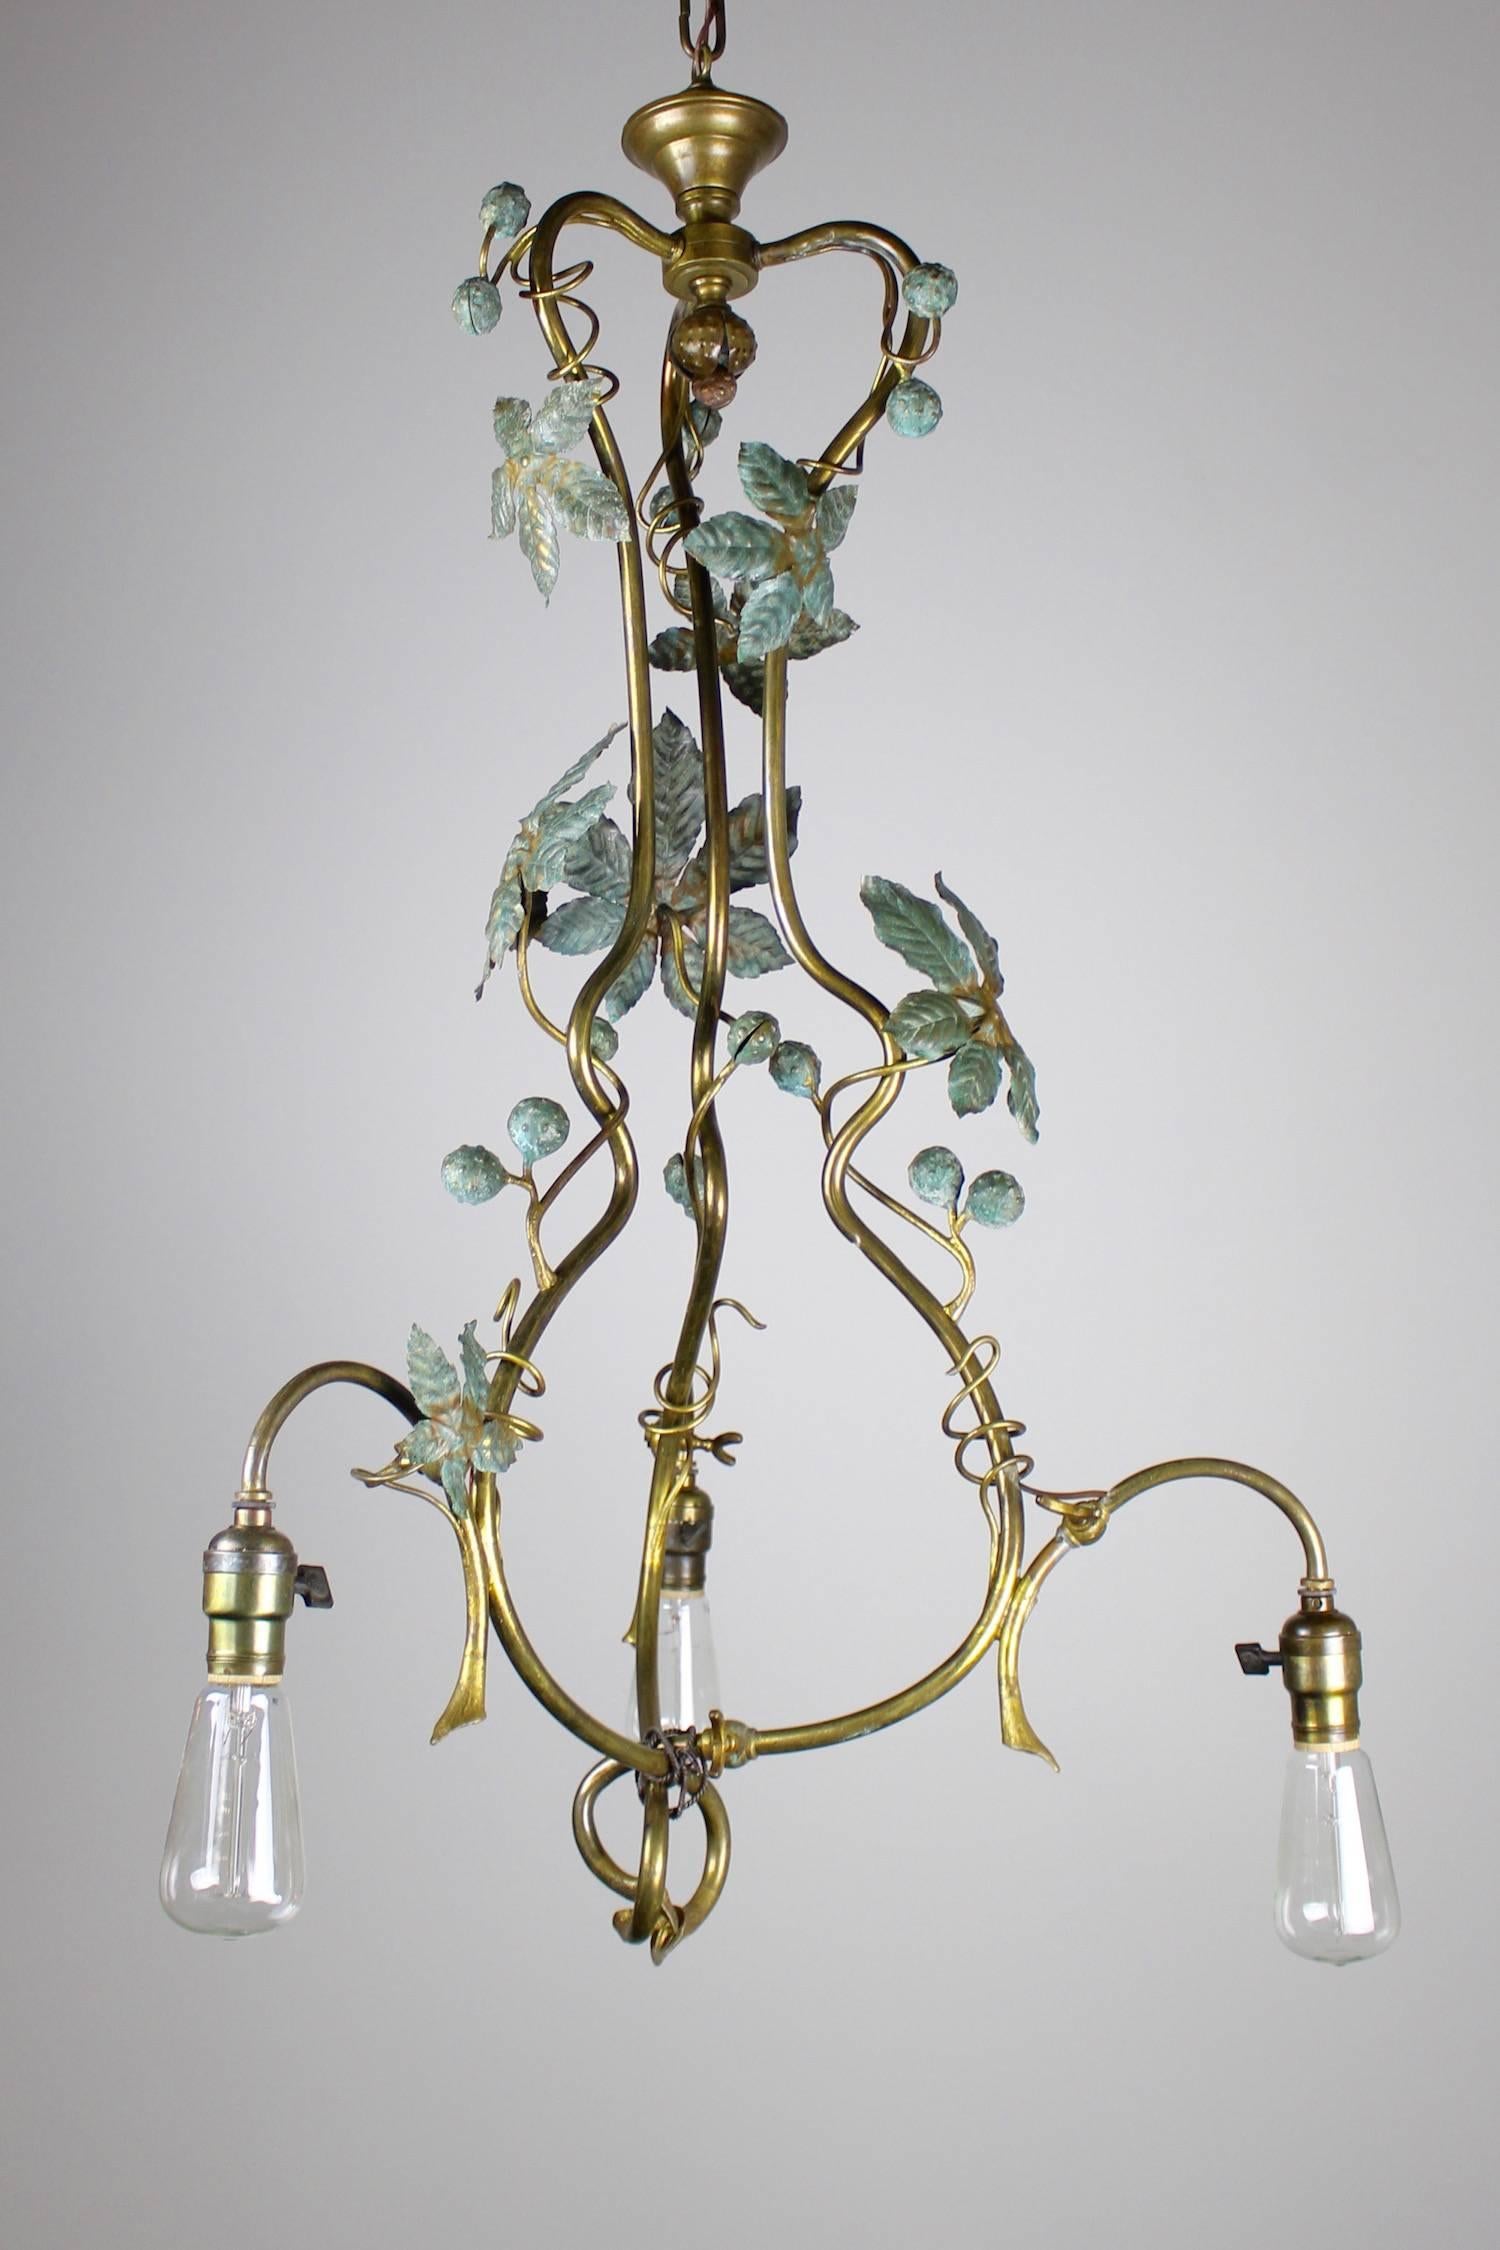 This converted gas-electric fixture, circa 1910. Constructed in an extremely organic manner, the light has the appearance of having just grown out of the ceiling. The light is fitted with three tungsten bulbs, and showcases a leafy arrangement of